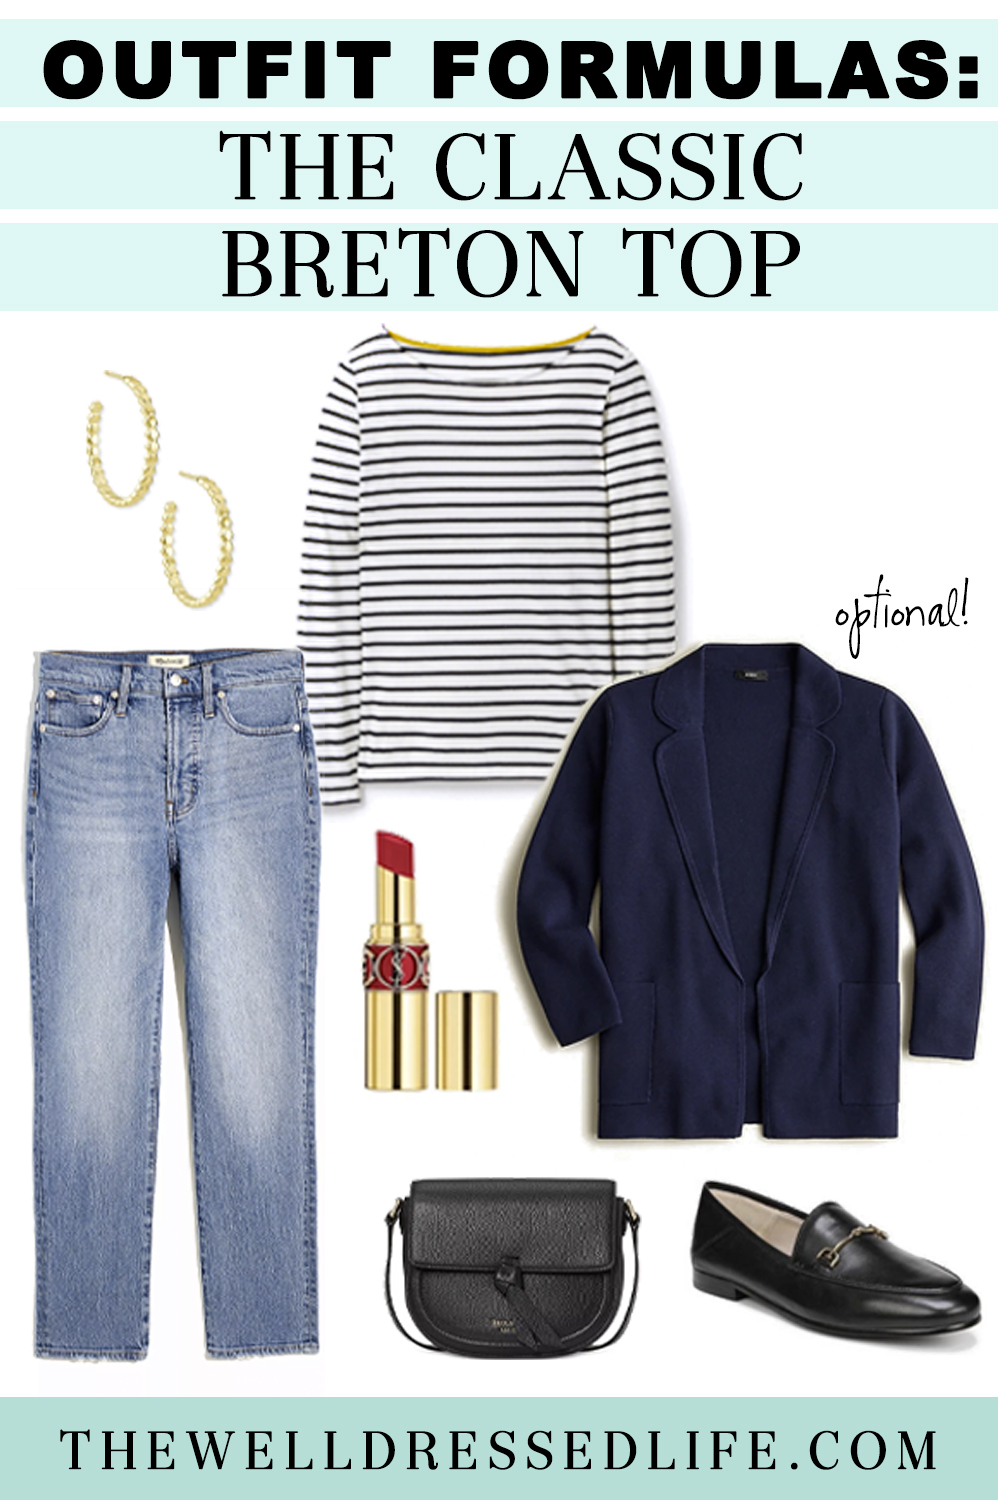 Outfit Formula: The Classic Breton Top